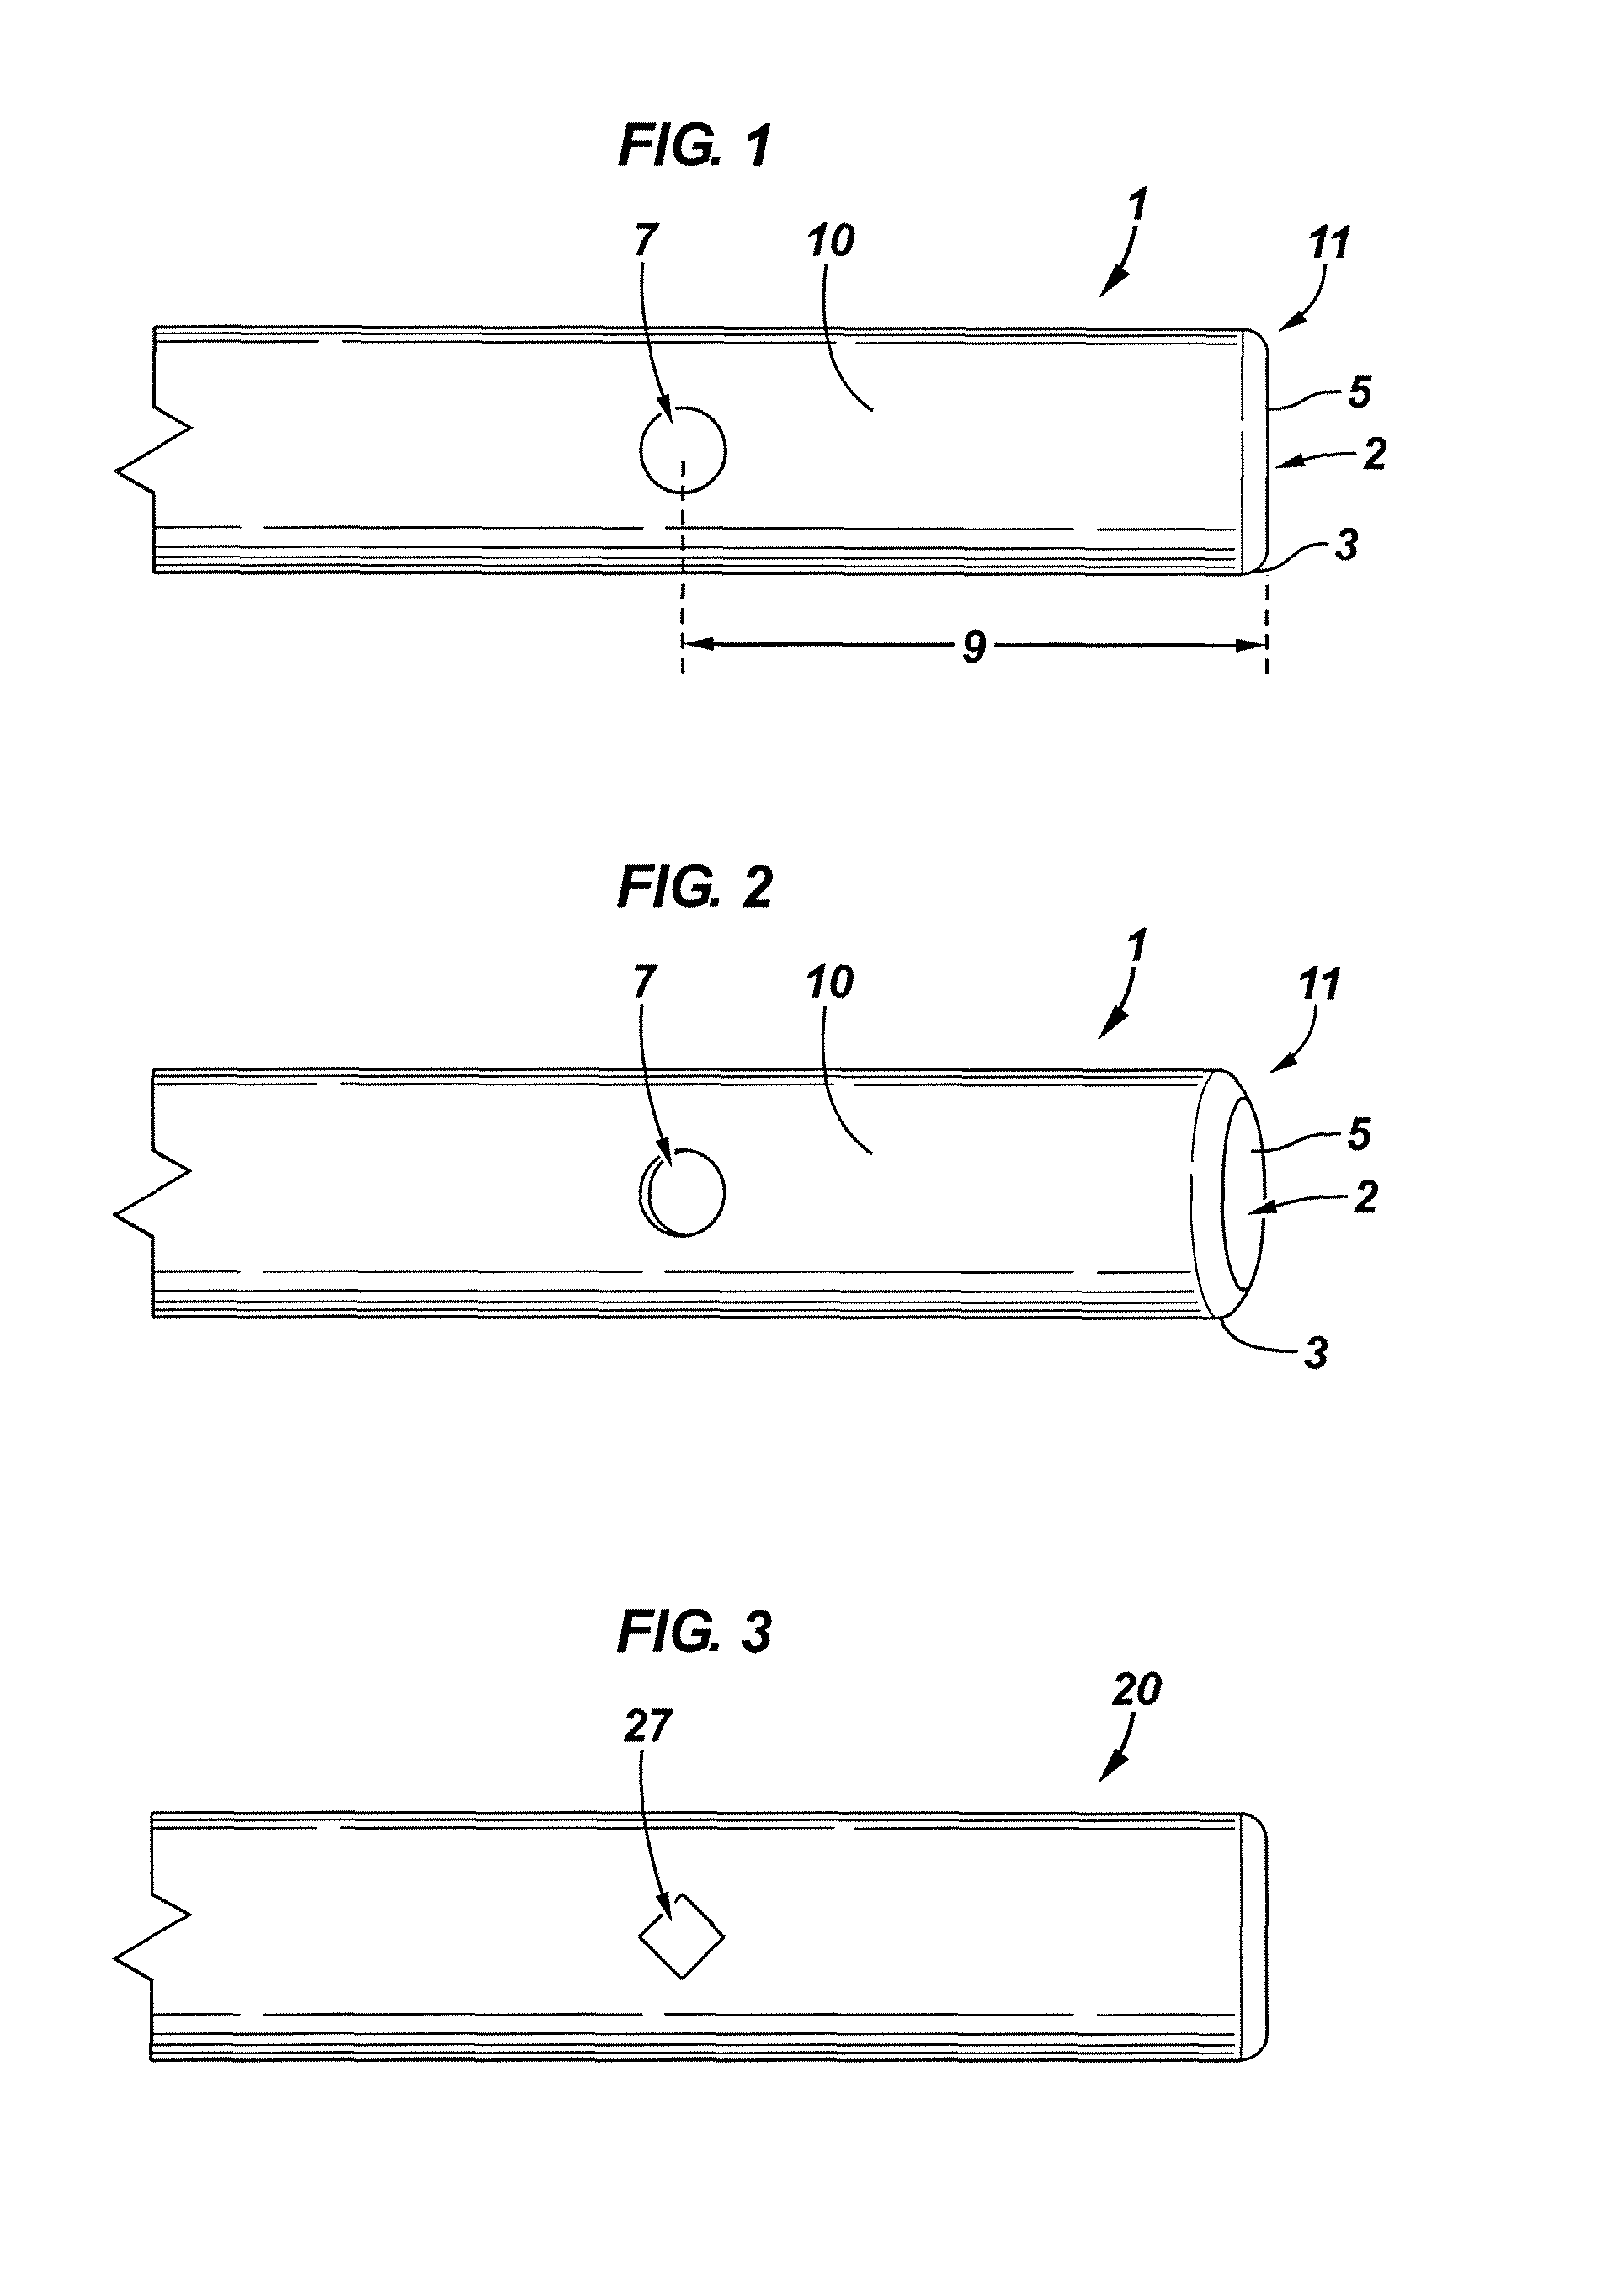 Neural injection system and related methods